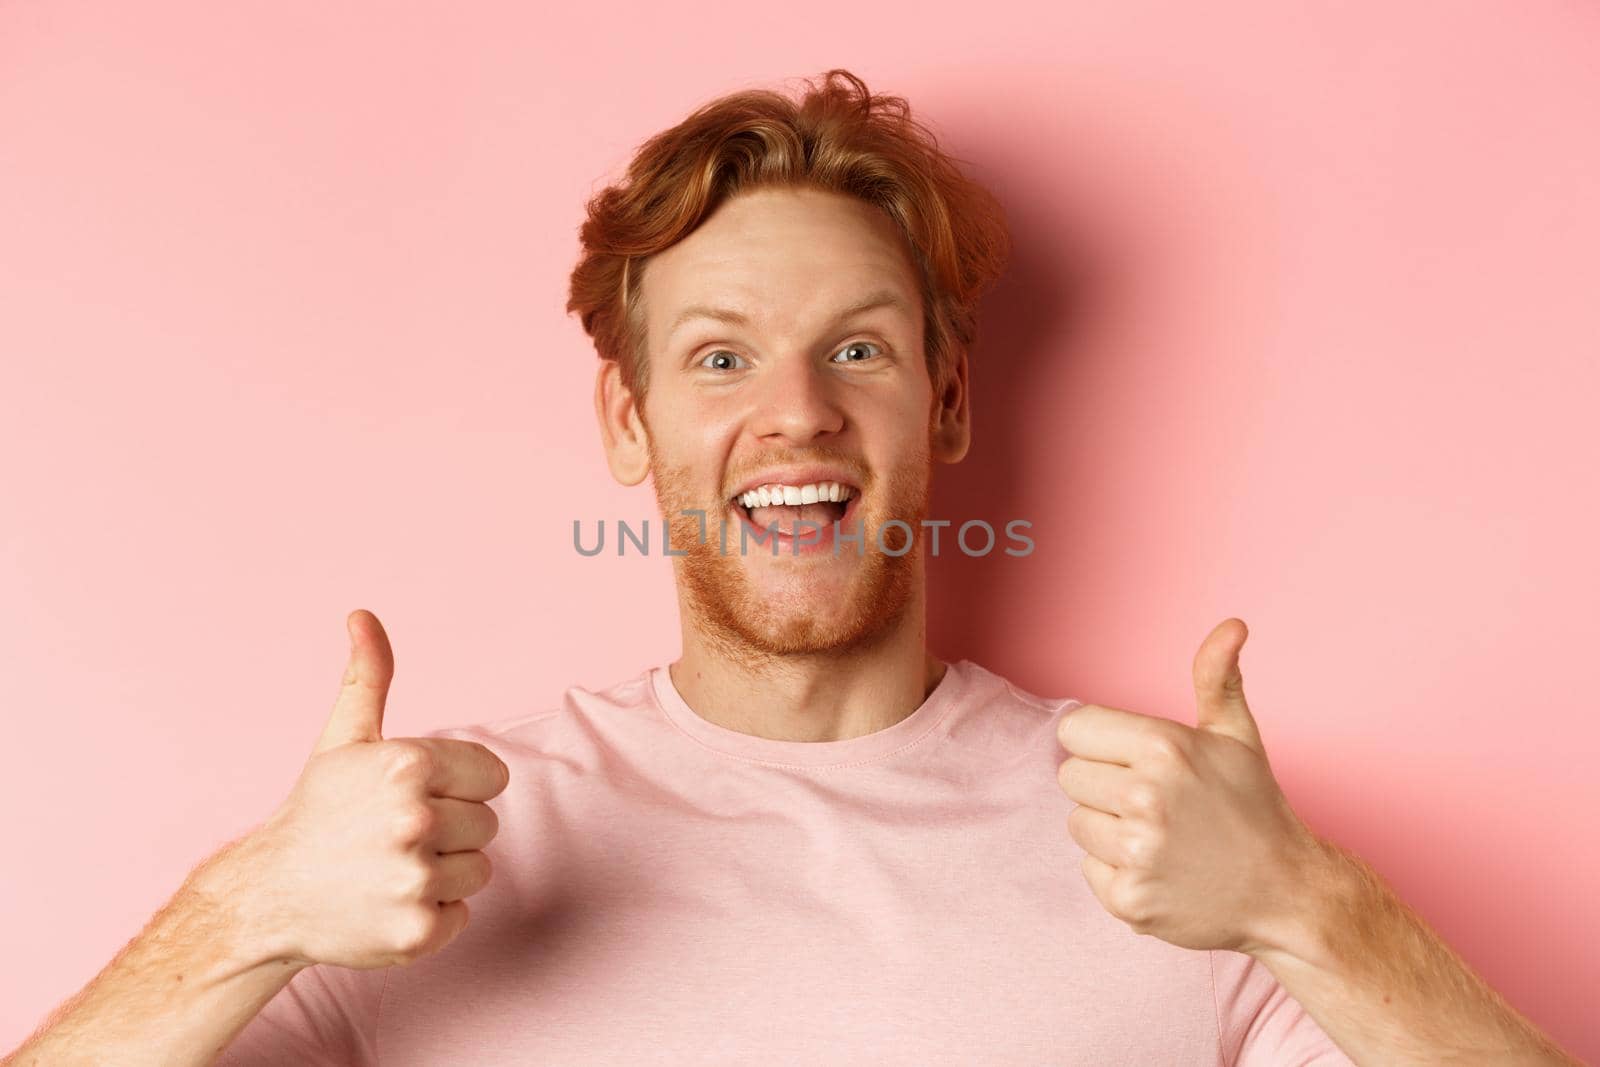 Close up of cheerful man with red hair and beard, showing thumbs up and smiling, saying yes, approve and praise something cool, standing over pink background.